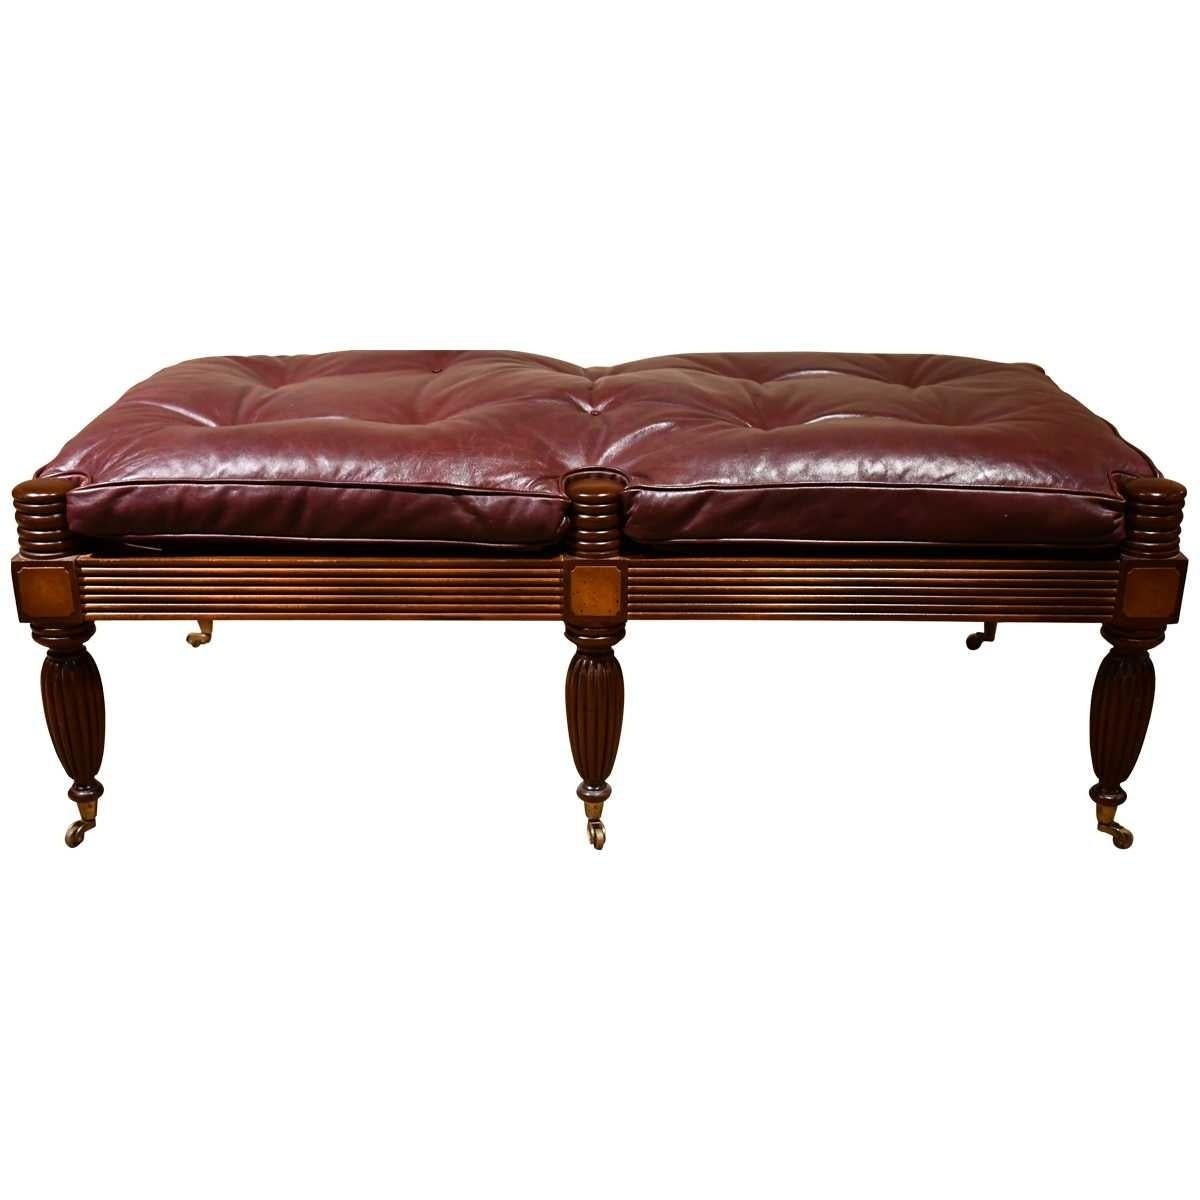 This handsome well made Regency style Mahogany bench is ideal in a foyer, mudroom, the foot of a bed or used as a coffee table in a den. The seat rail is reeded along with the six turned legs; each topped with a contrasting burl inlay and terminated